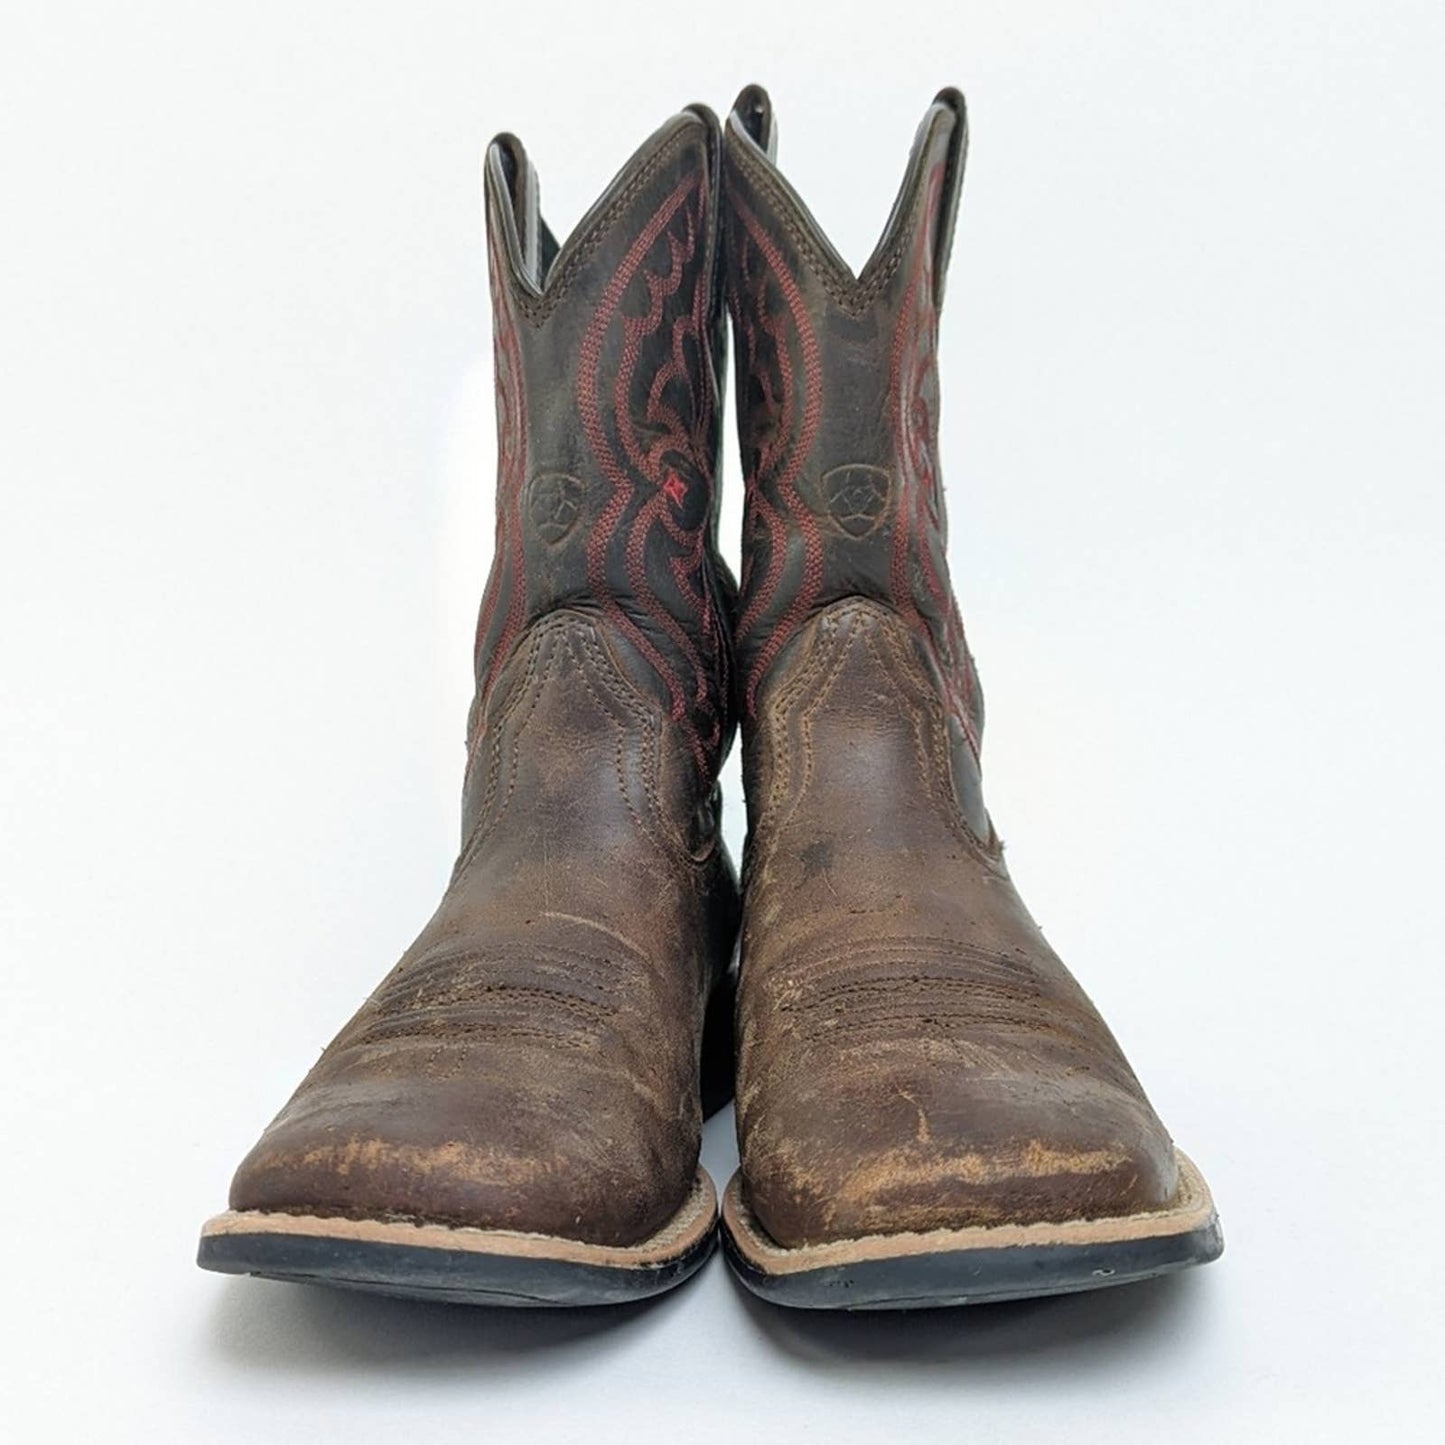 Ariat Distressed Brown Quickdraw Square Toe Cowboy Boots - C4